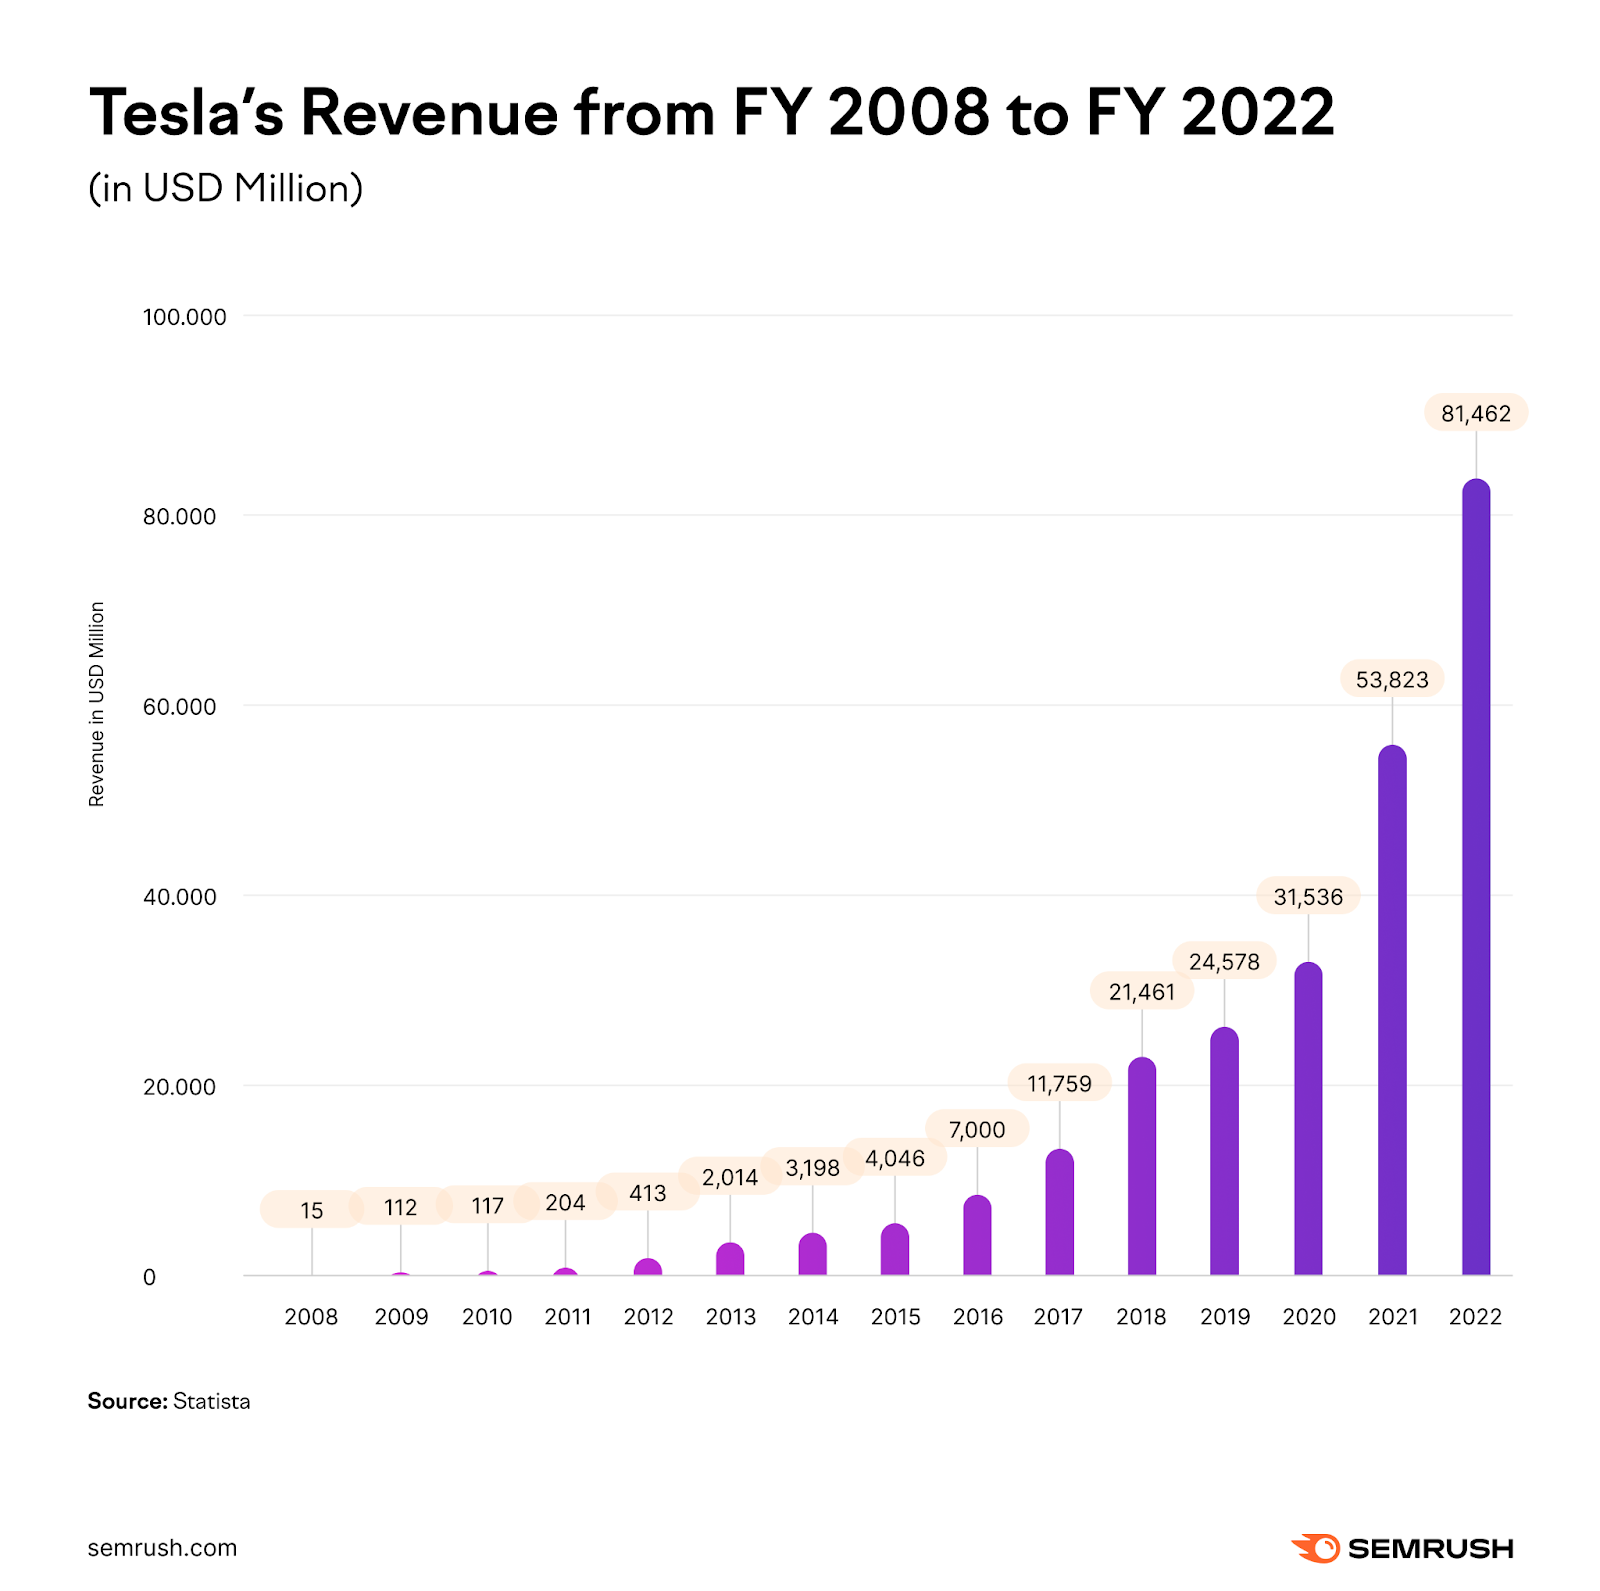 Tesla's gross  graph from FY 2008 to 2022